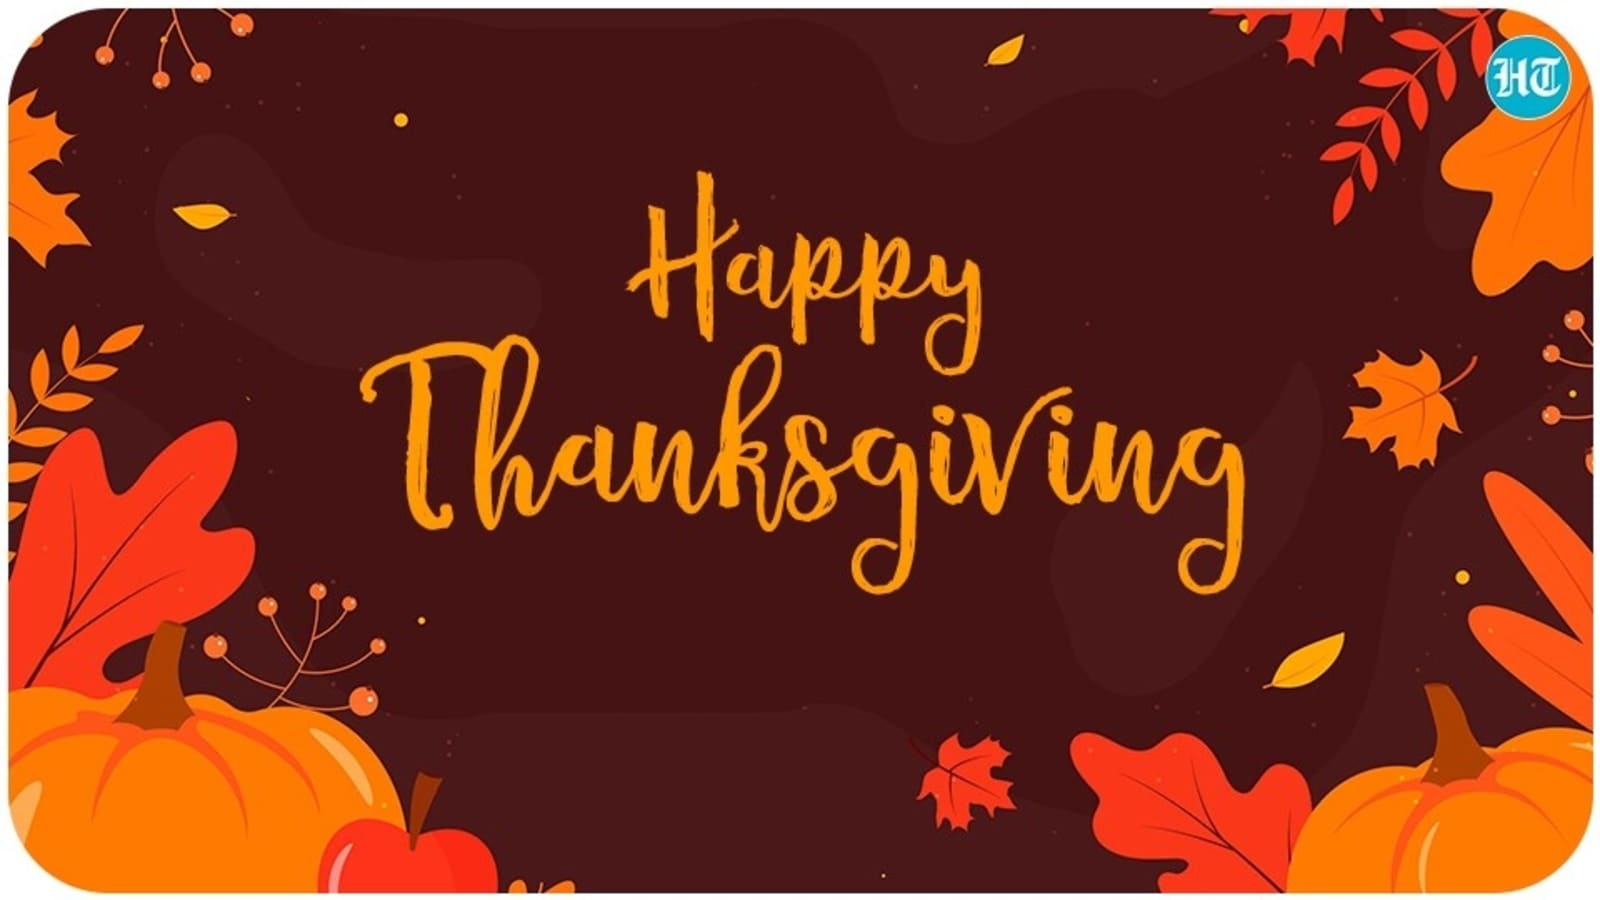 Happy Thanksgiving 2021: Wishes, image, messages and greetings to share with family and friends